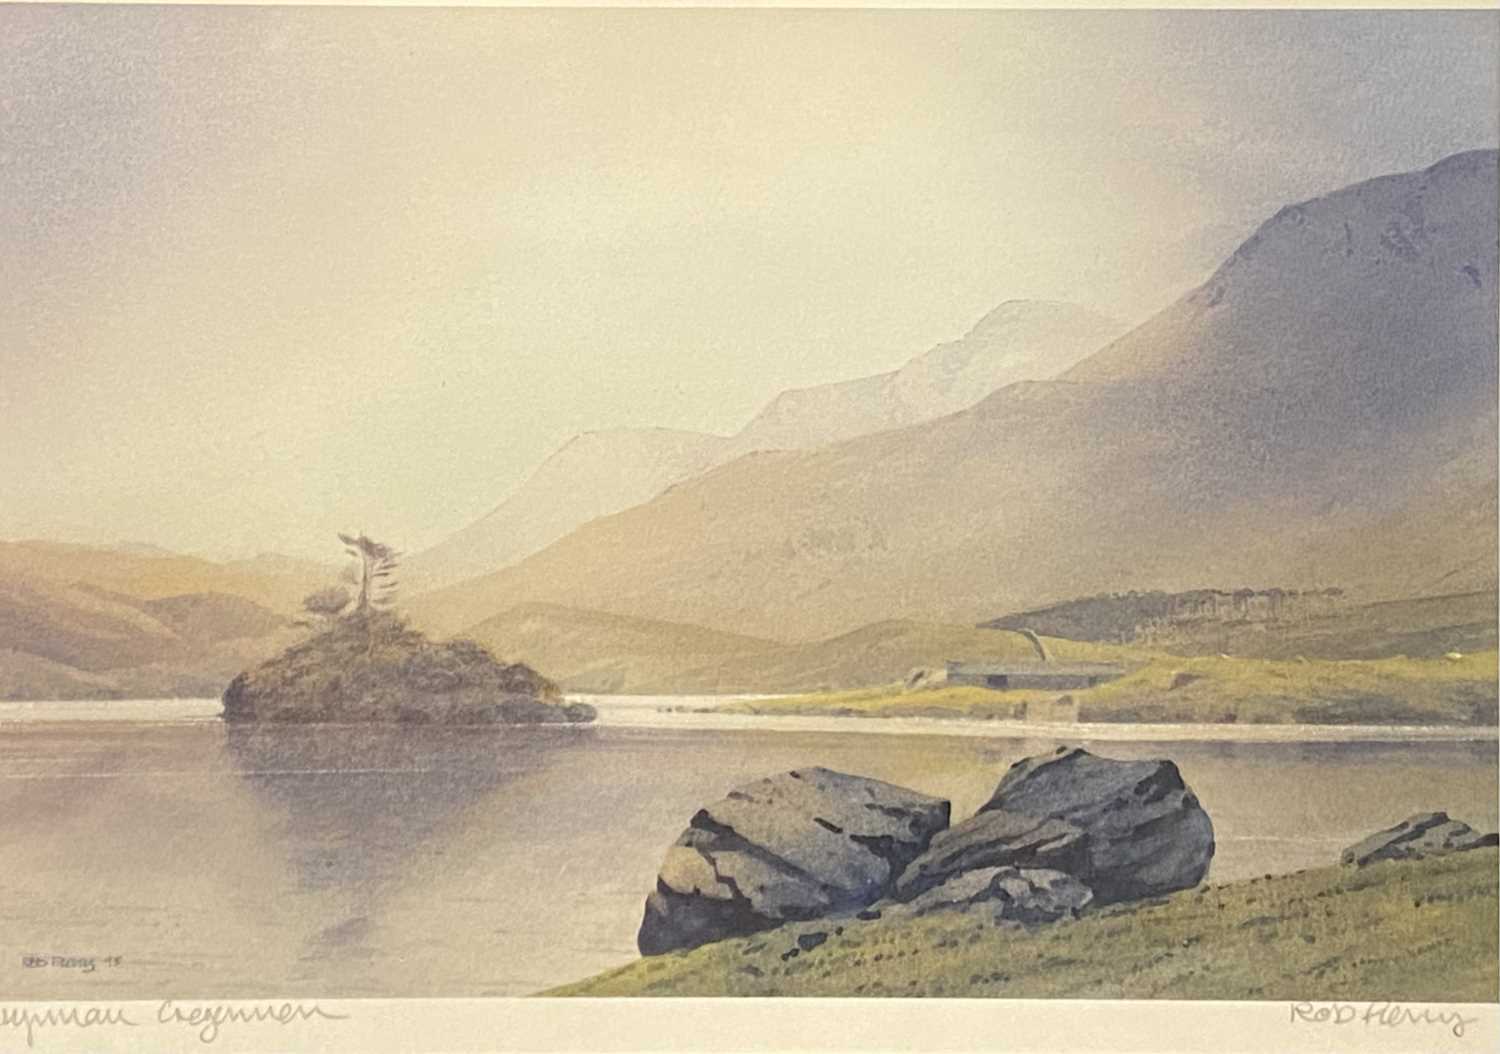 KEITH BOWEN limited edition print 216/850 - Crib Goch, Snowdonia hillside with sheep grazing, signed - Image 3 of 3